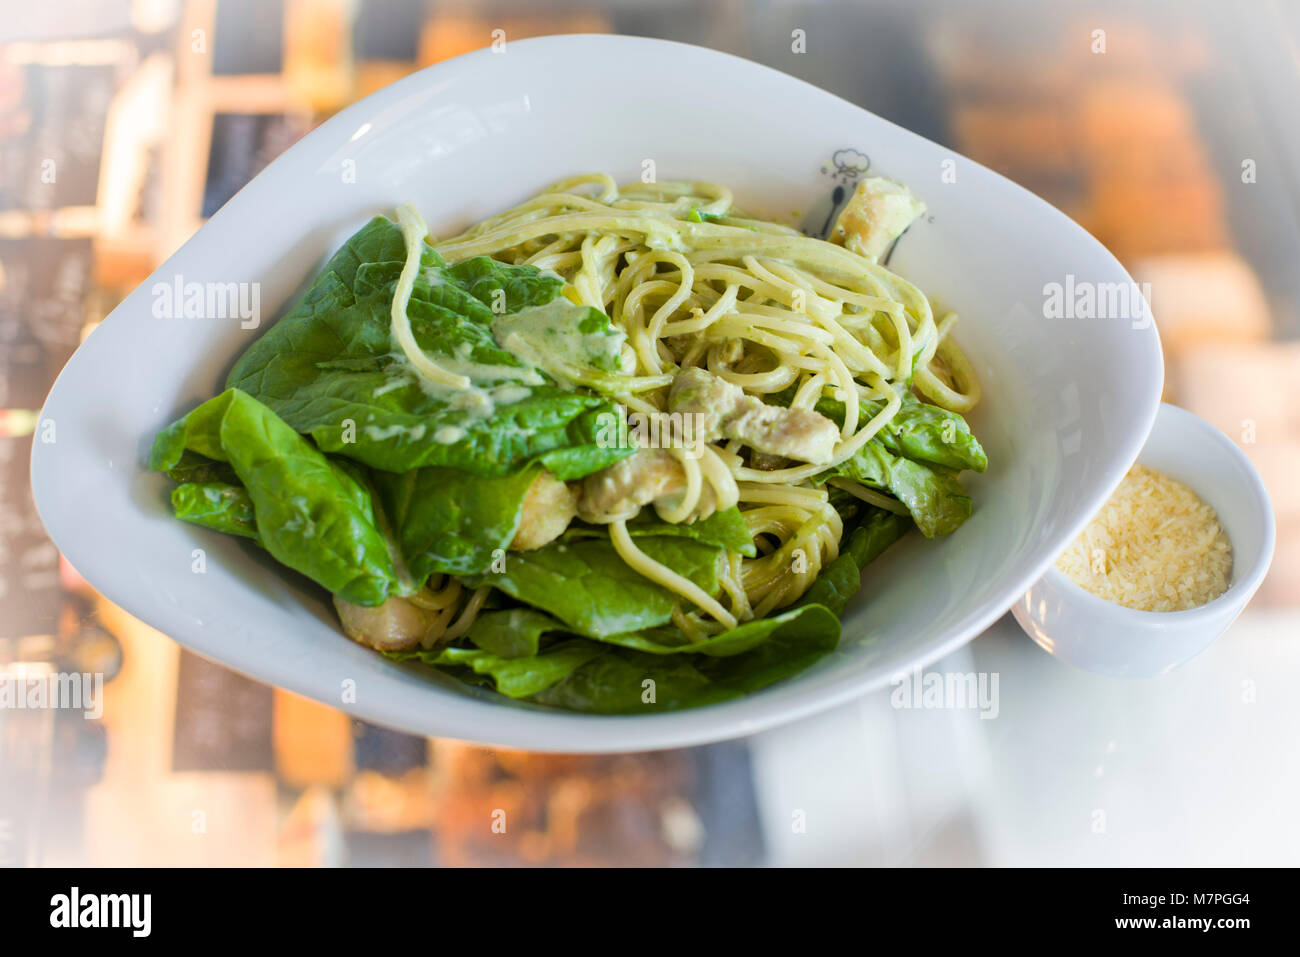 Pasta, prepared with cheese, green, meat, and served in oval deep porcelaine plate Stock Photo